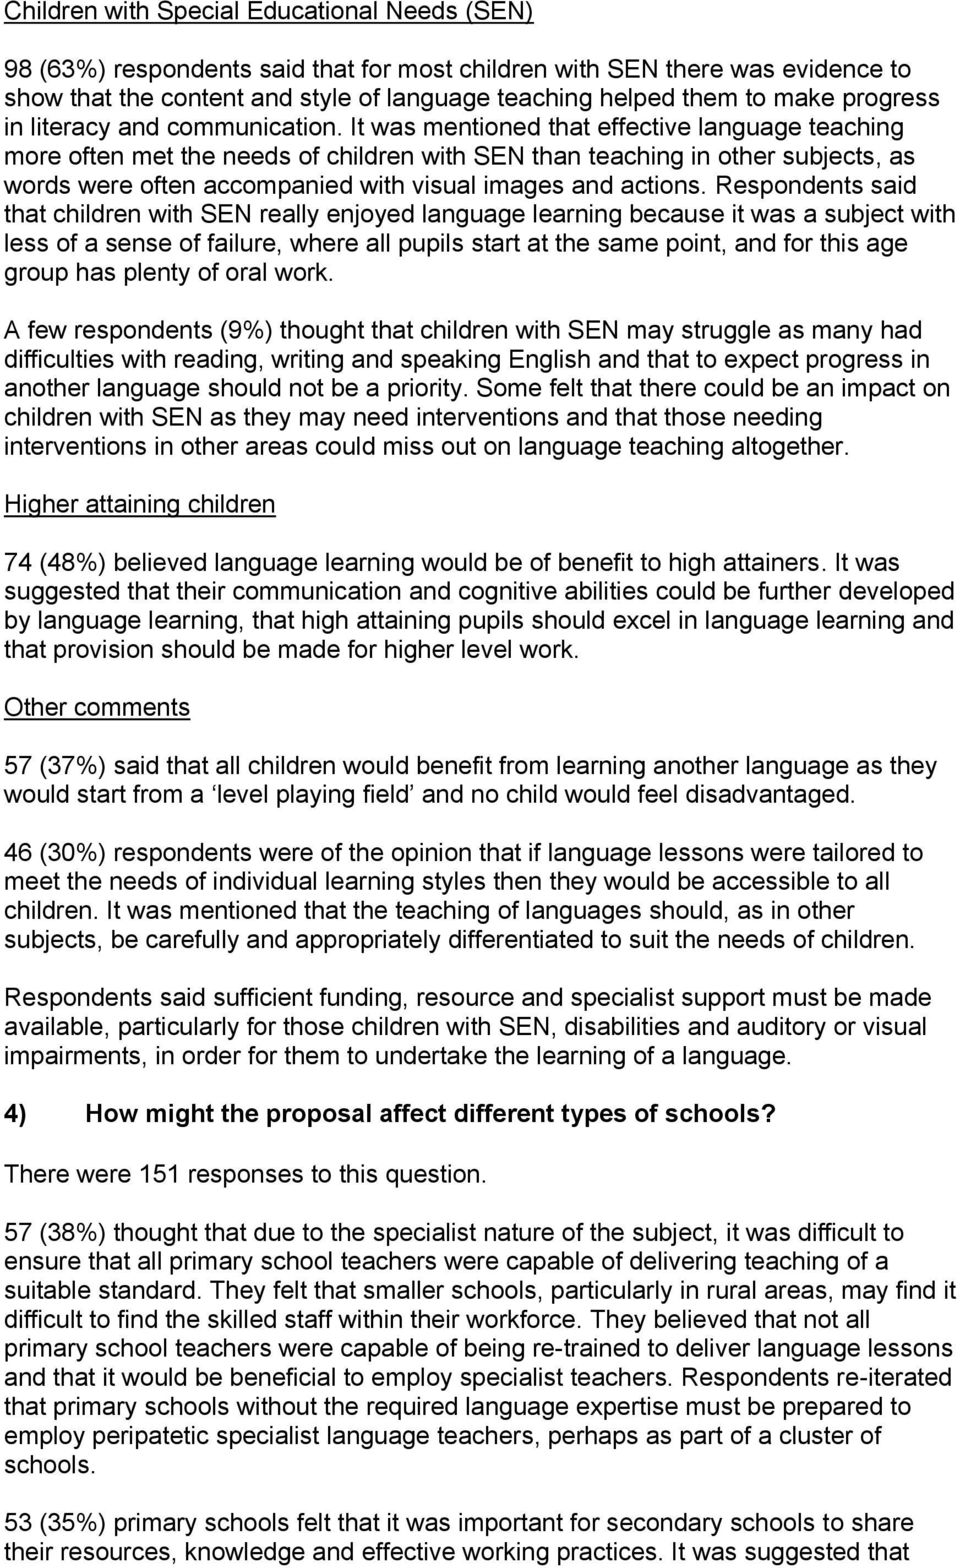 It was mentioned that effective language teaching more often met the needs of children with SEN than teaching in other subjects, as words were often accompanied with visual images and actions.